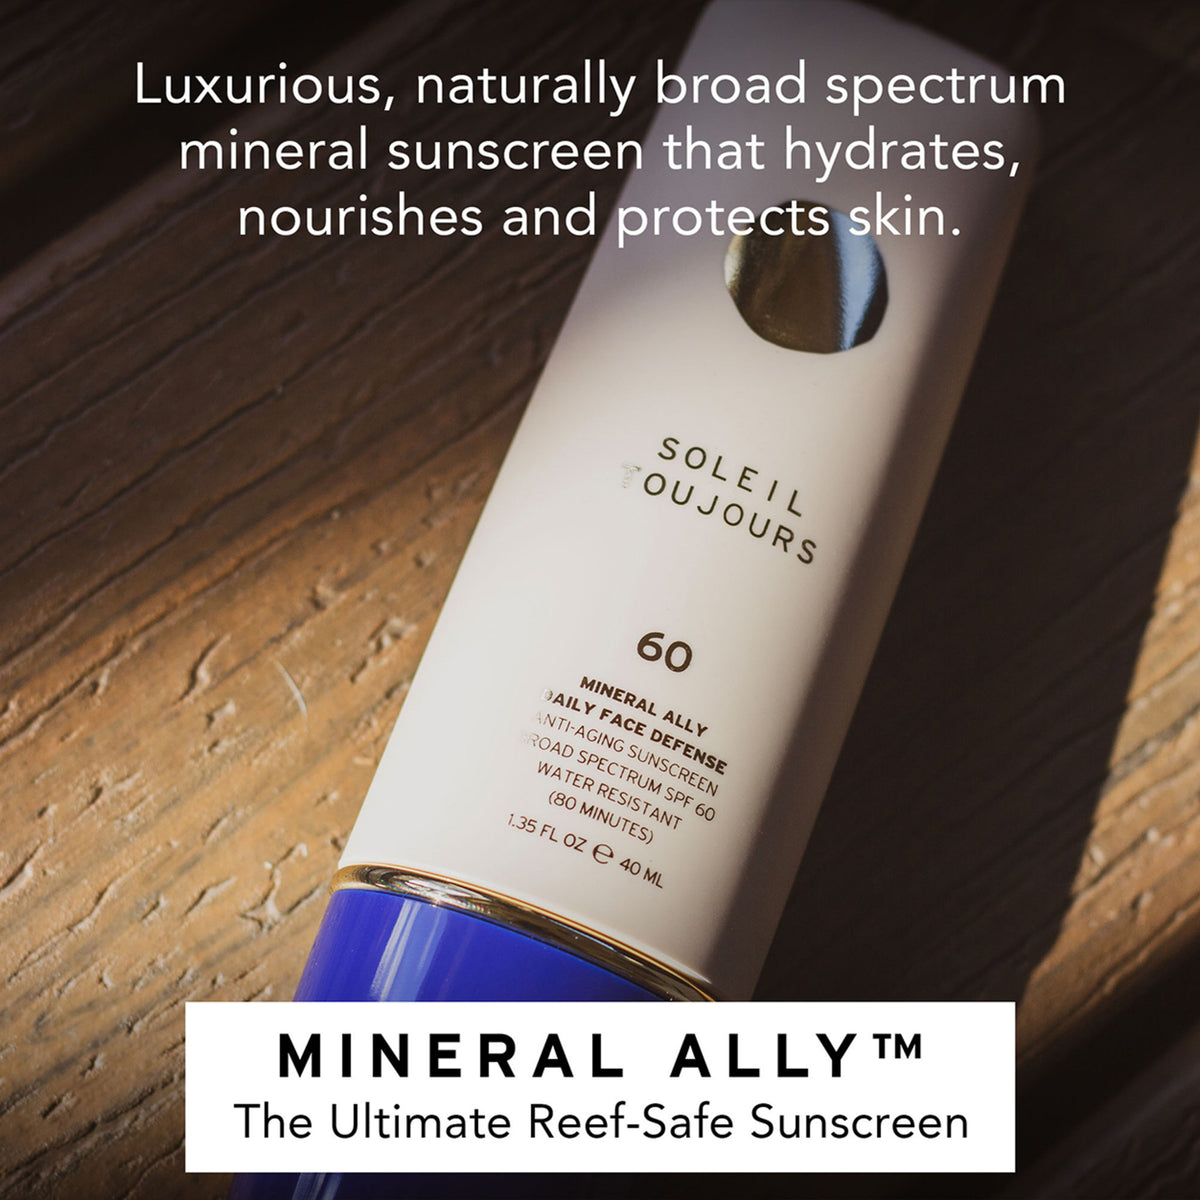 Soleil Toujours Mineral Ally Daily Face Defense SPF 60 .